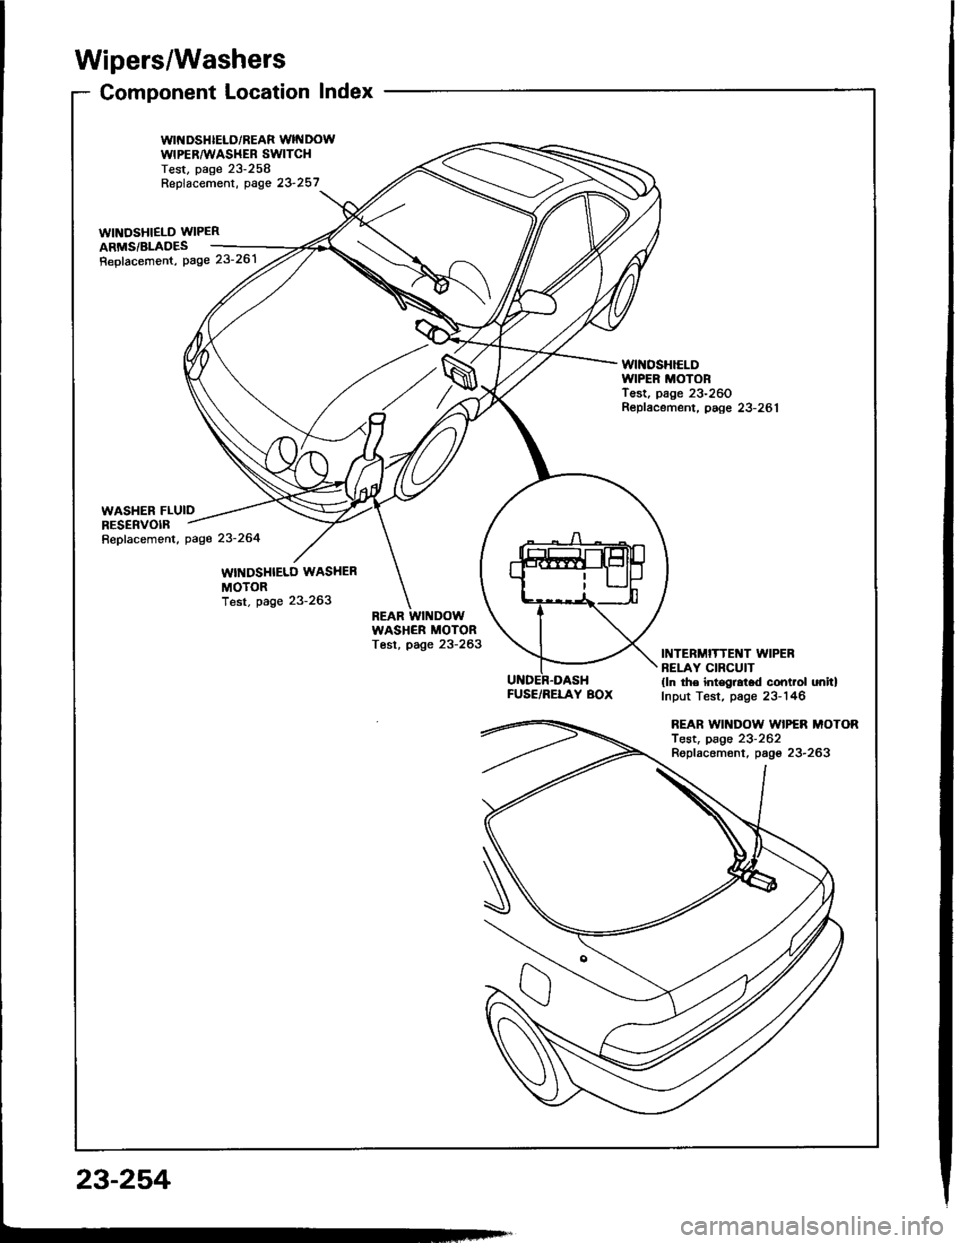 HONDA INTEGRA 1994 4.G Workshop Manual Wipers/Washers
Component Location Index
WII{DSHIELD/REAR WINDOWWIPERAAASHEB SWITCHTest, page 23-258Replacement, oase 23 257_..
wtNosHlELD WIPER 2ARMS/BLADES ___-=4,
Repfacemont, Page 23261 /tt /
WI